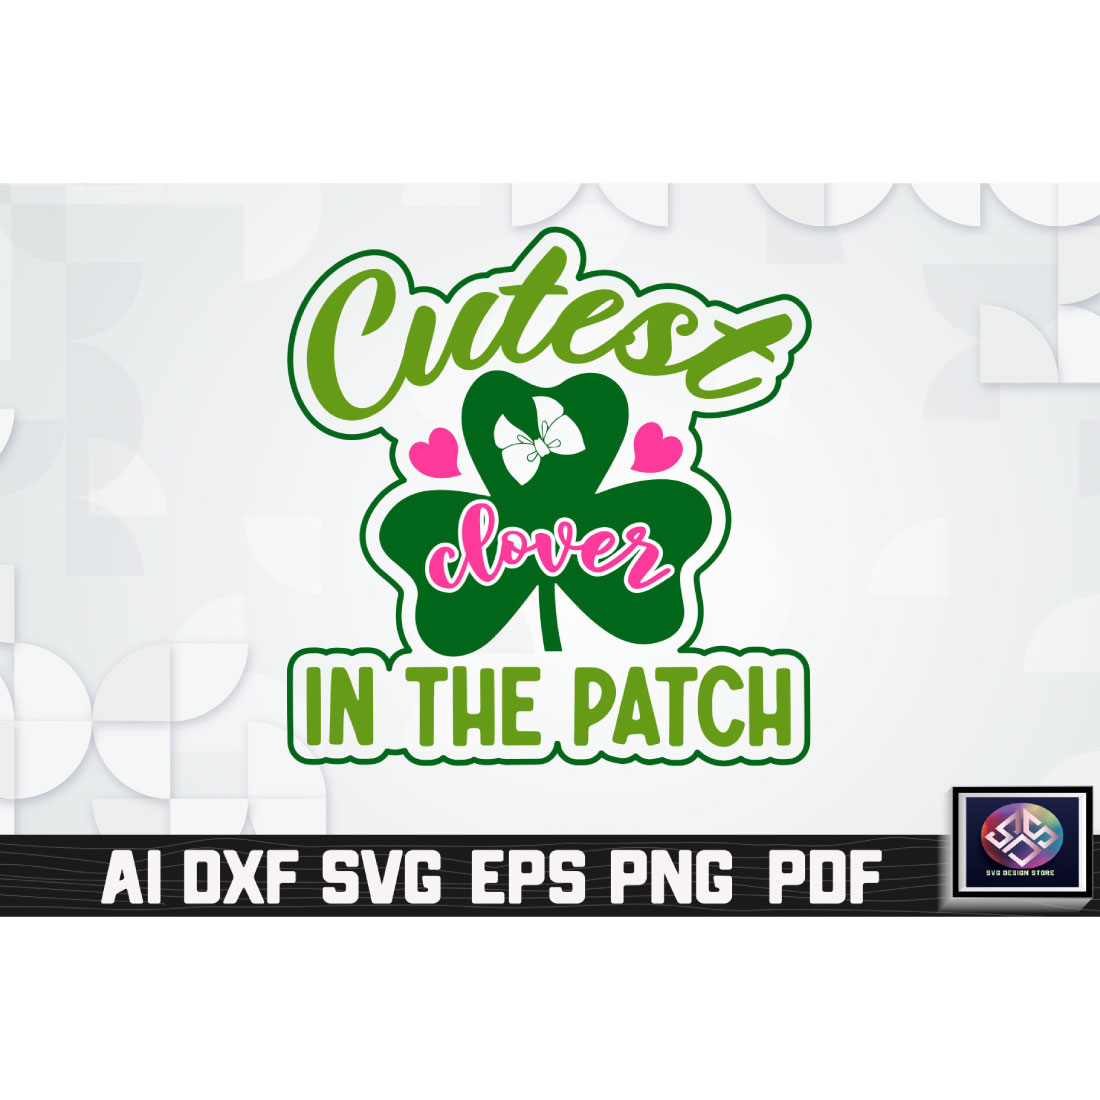 Cutest Clover In The PatchCutest Clover In The Patch cover image.